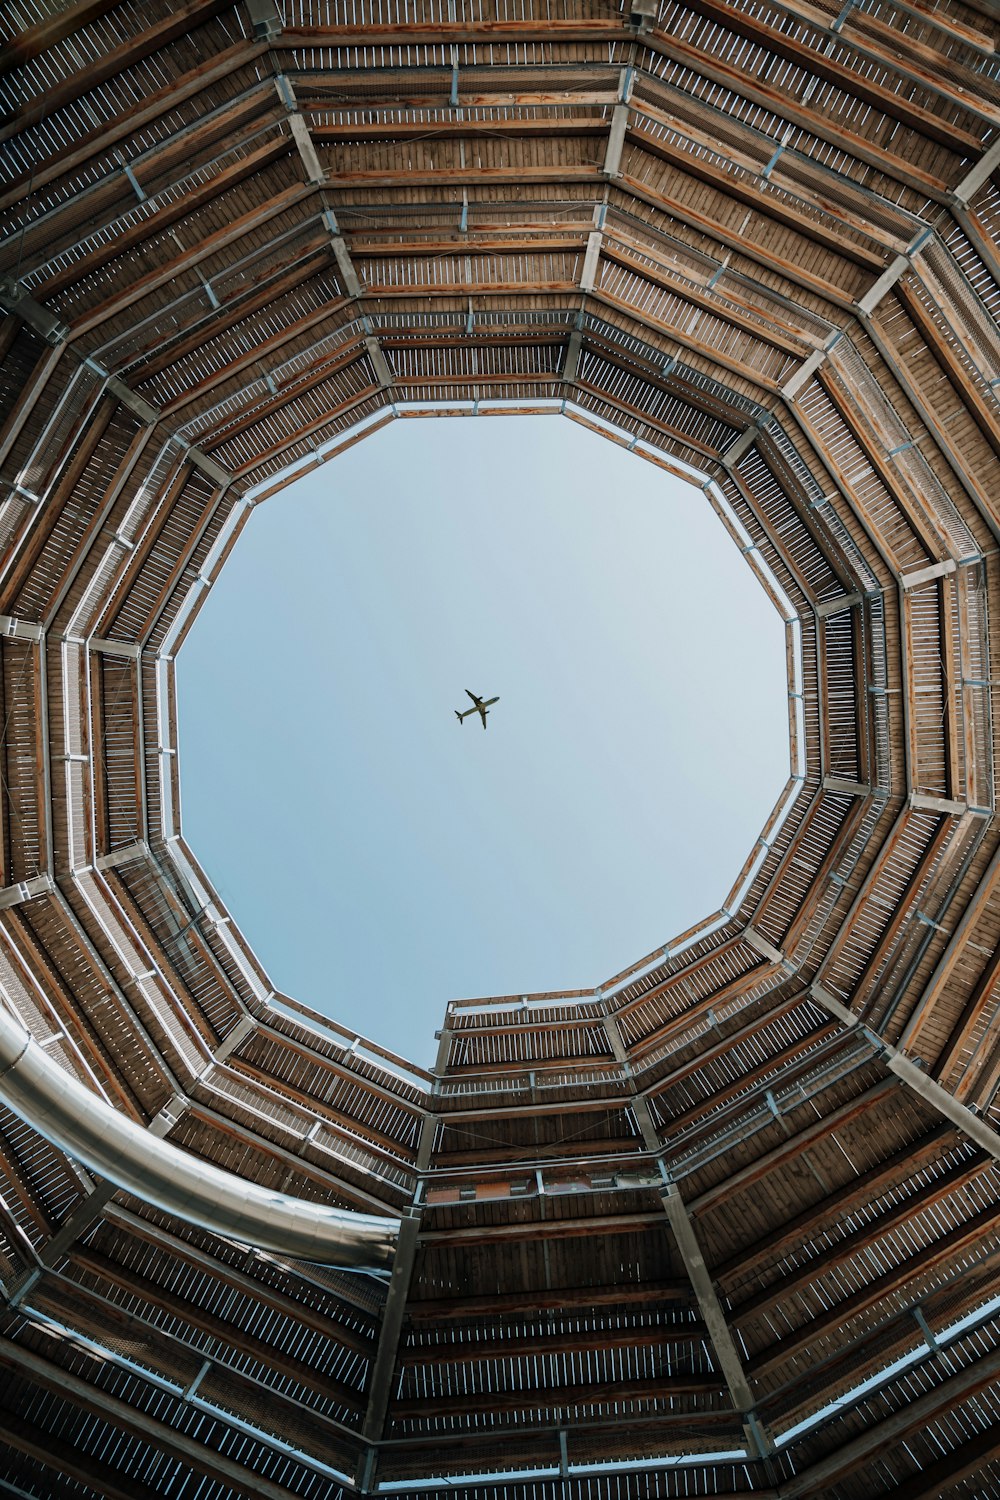 an airplane flying in the sky through a wooden structure